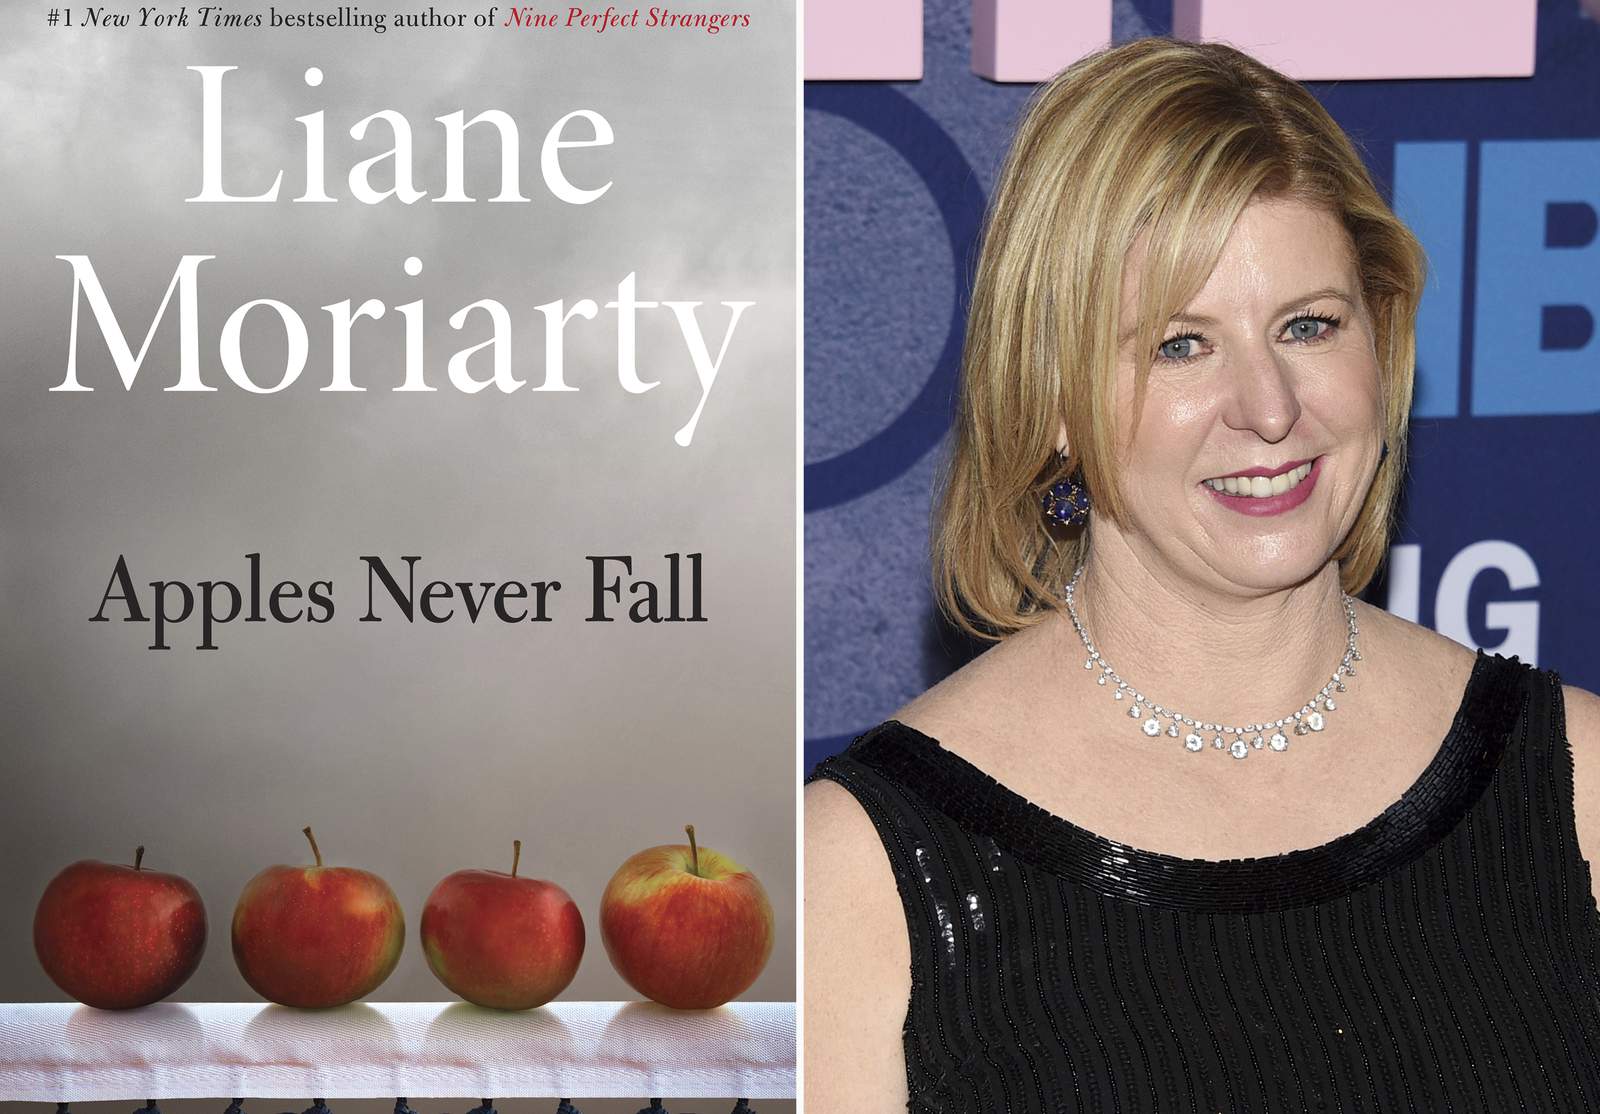 'Big Little Lies' author has new novel out in September